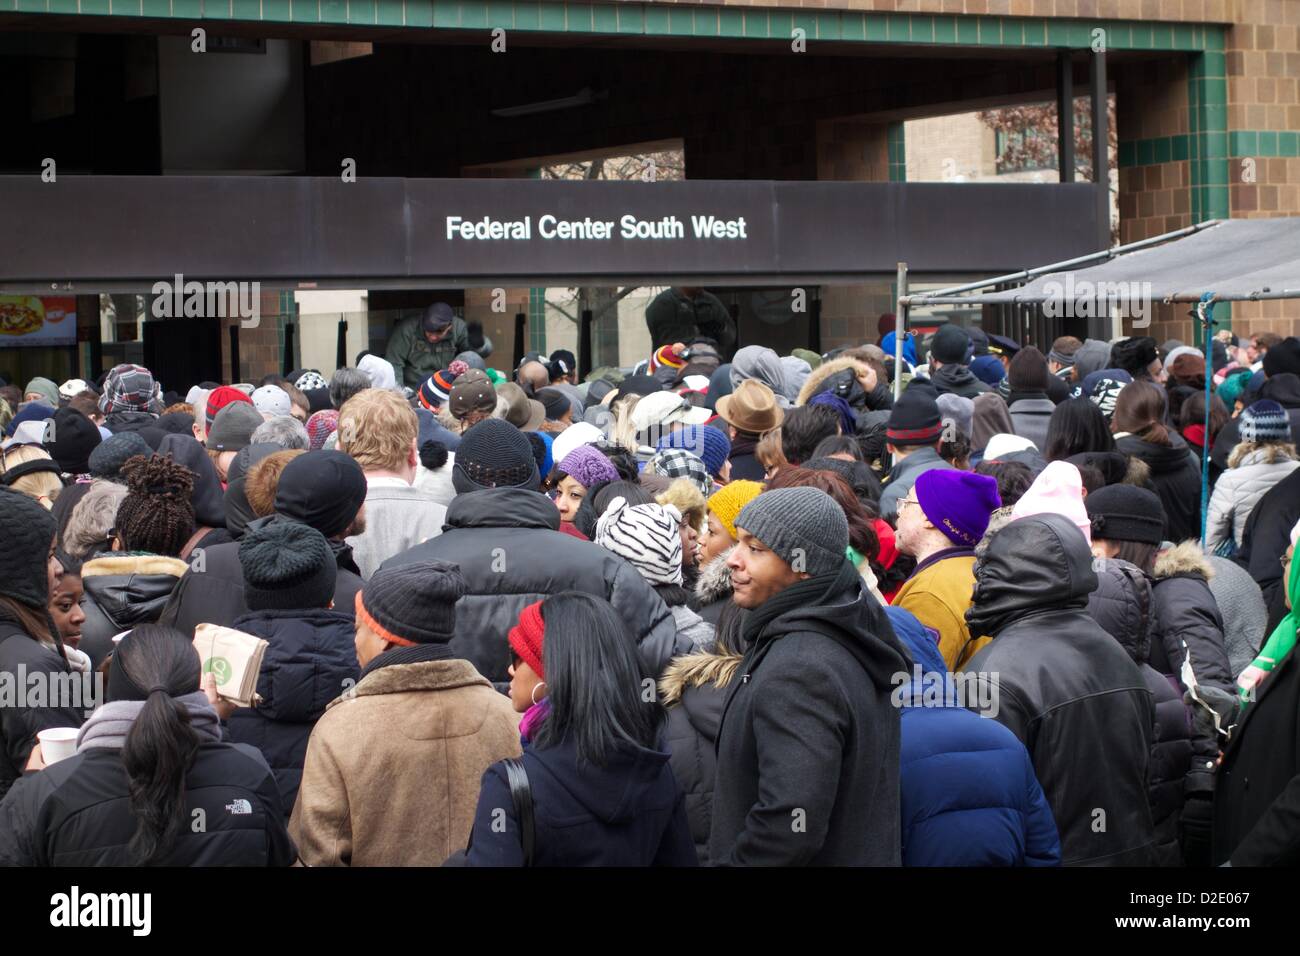 January 21, 2013, Washington DC. A crowd of people squeezes into the Federal Center South West Metro station after the 57 Presidential Inaugural marking the beginning of President Obama's second term. Stock Photo